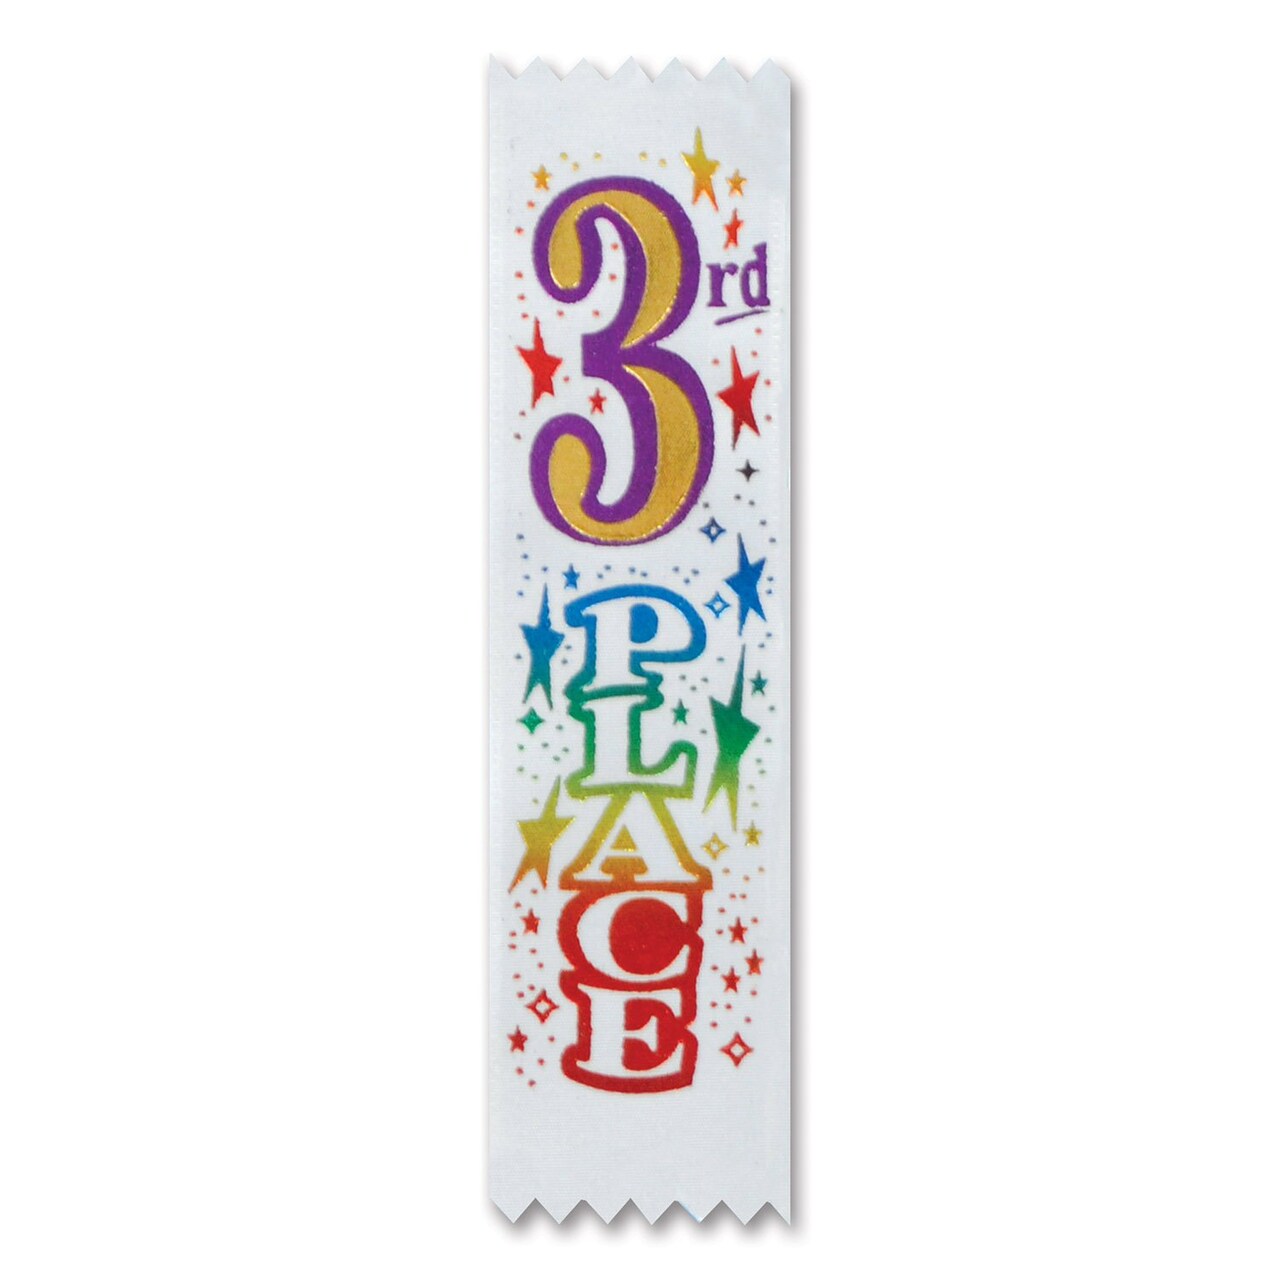 3rd Place Value Pack Ribbons (Pack of 3)